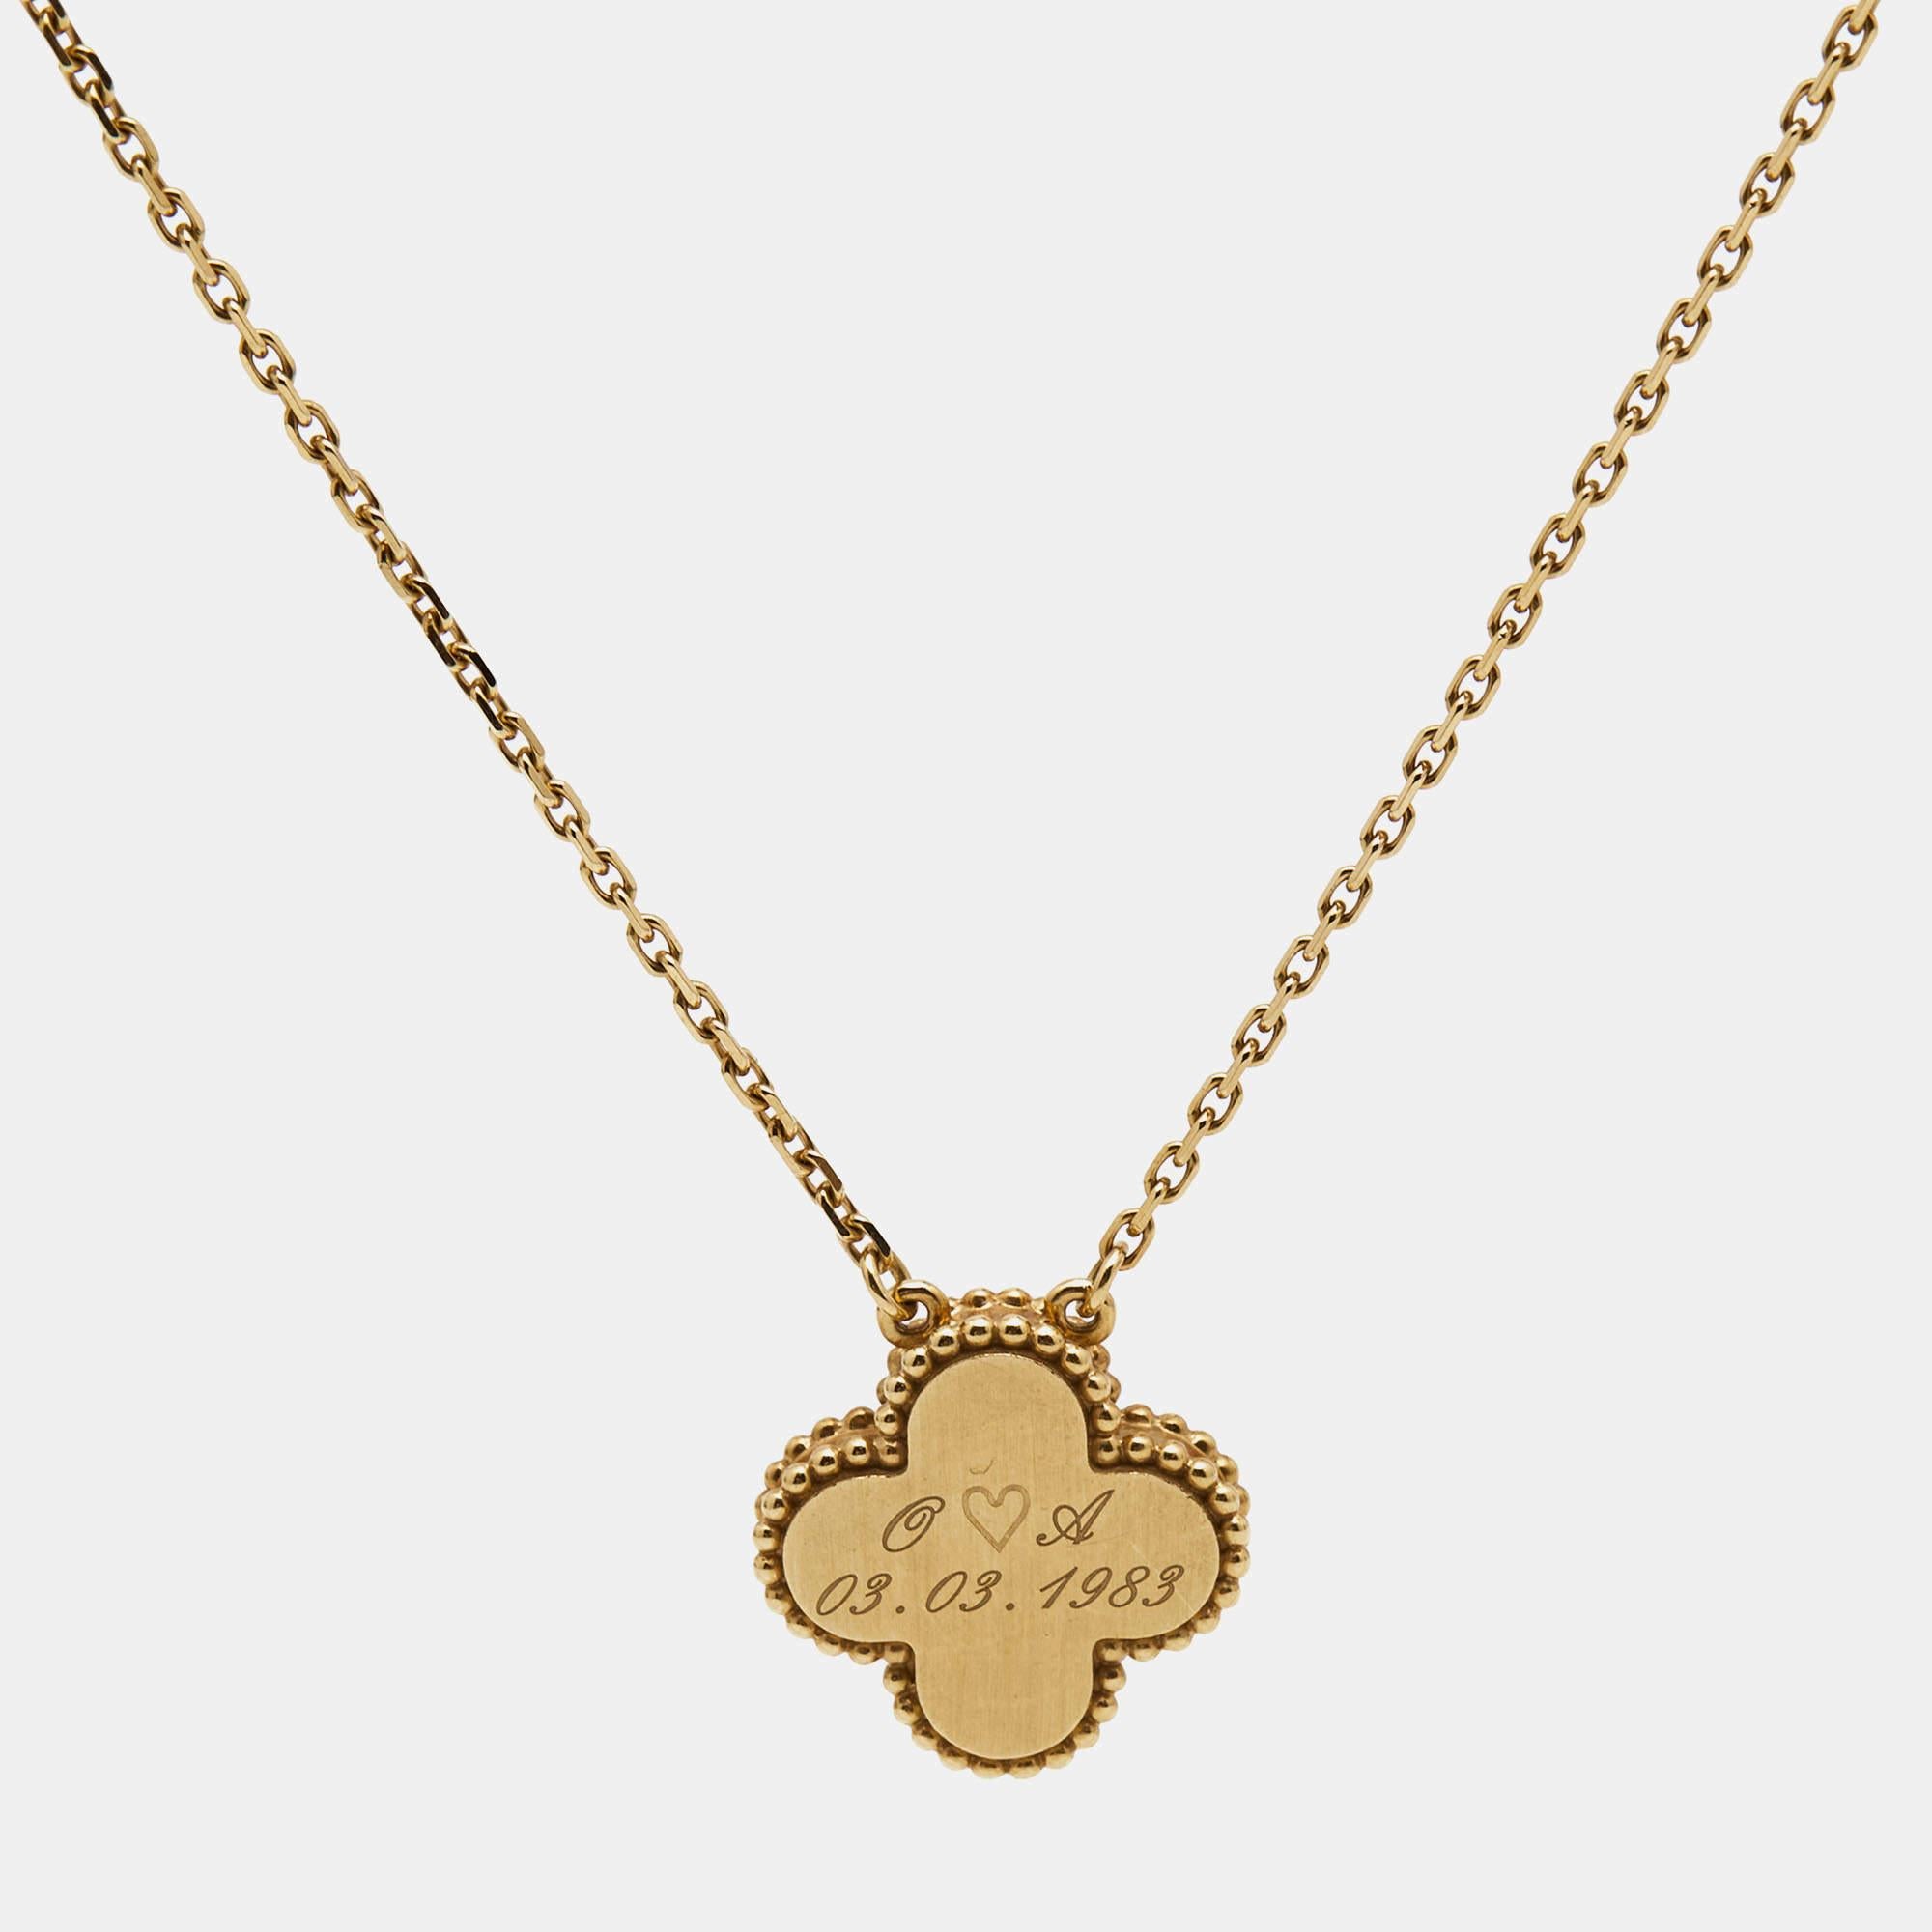 Van Cleef & Arpels’ Alhambra jewel was first created in 1968, and the Vintage Alhambra creations remain faithful to its timeless elegance. The iconic clover motif is a potent symbol of luck, and here, it comes in 18k yellow gold, set with mother of